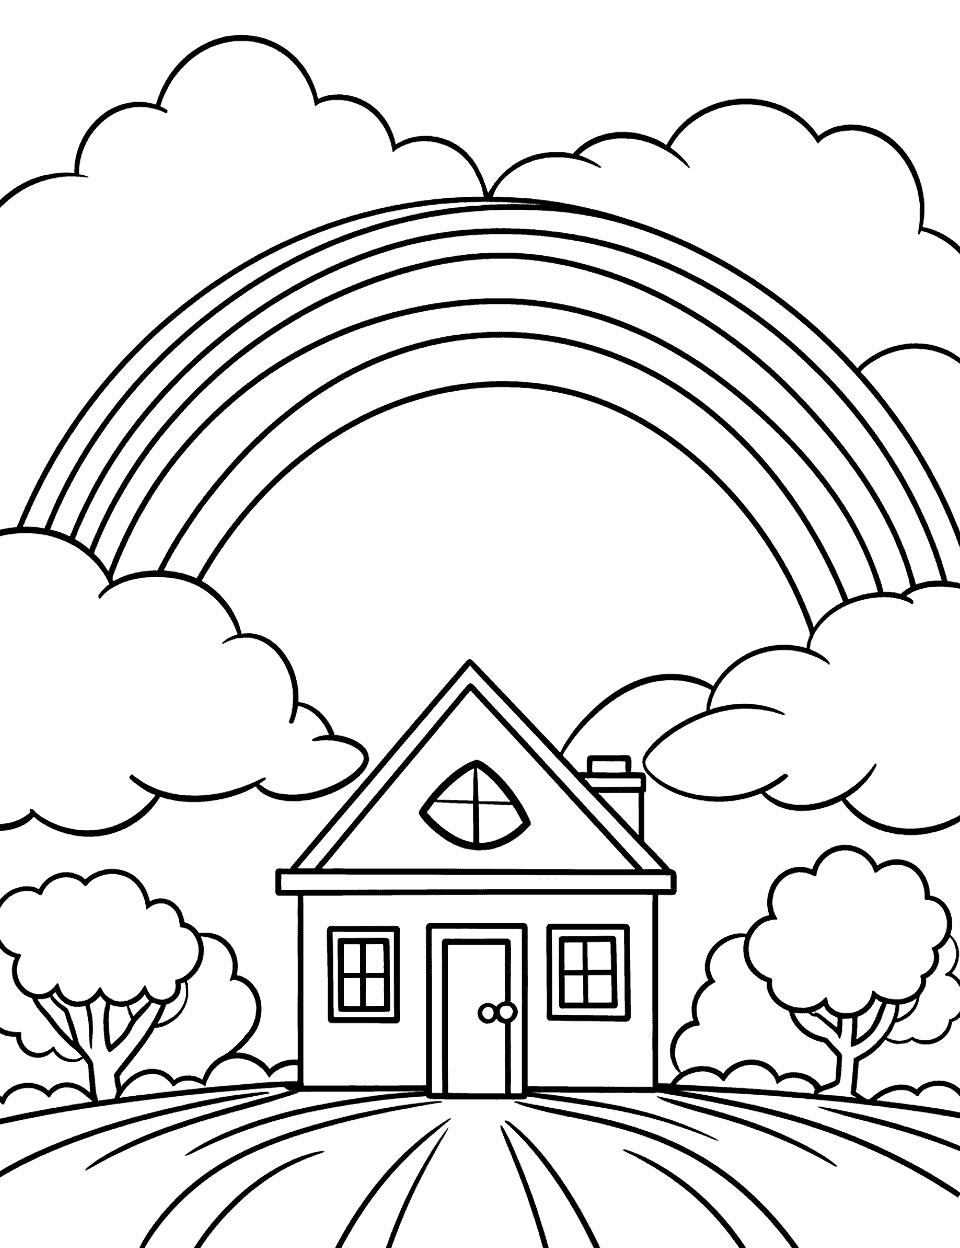 Rainbow Over Kindergarten Coloring Page - An easy-to-color scene of a kindergarten class with a big, bright rainbow overhead.